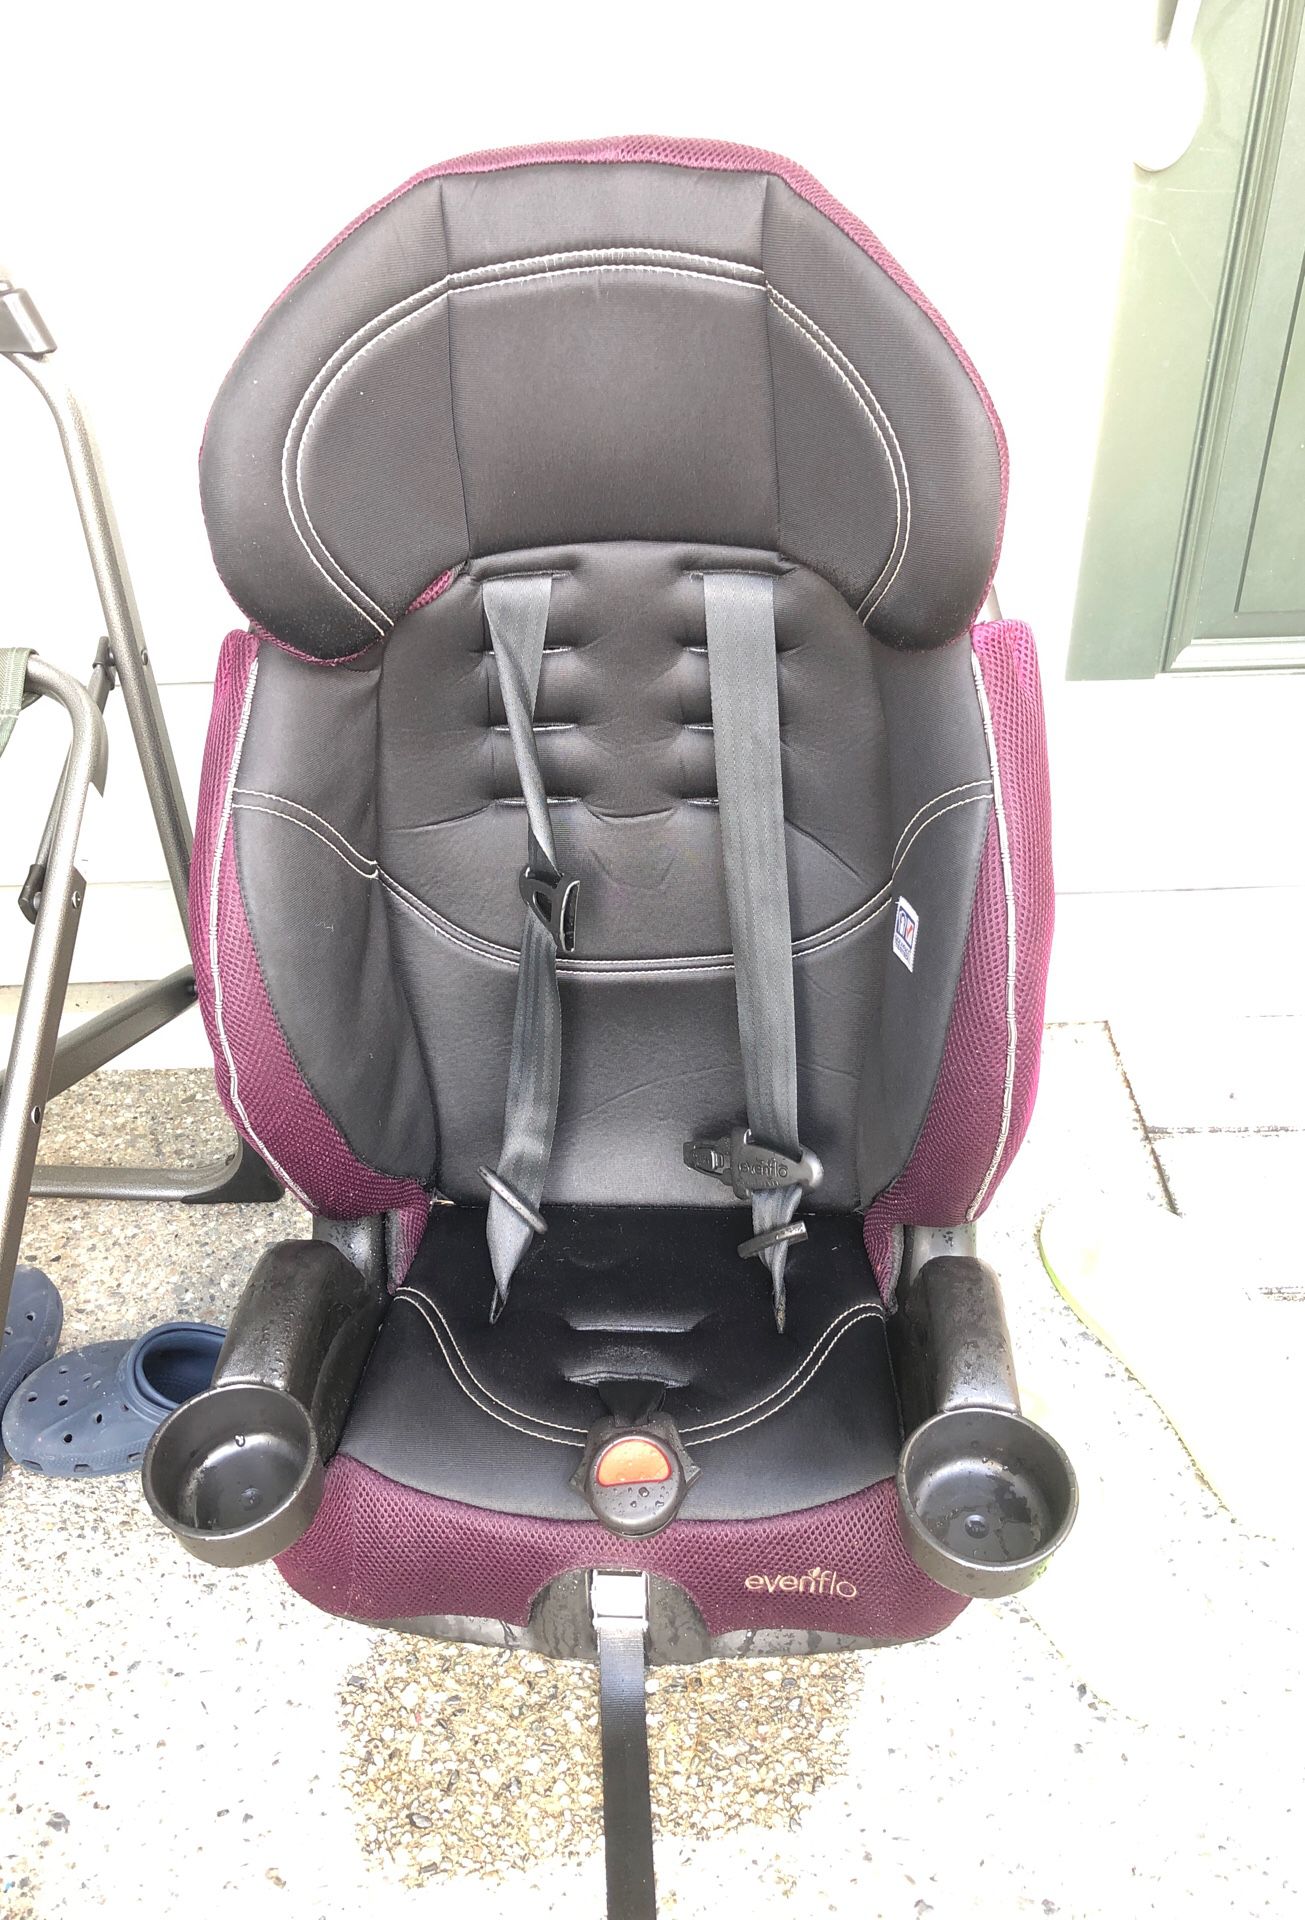 Evenflo car seat(could be used as booster too)